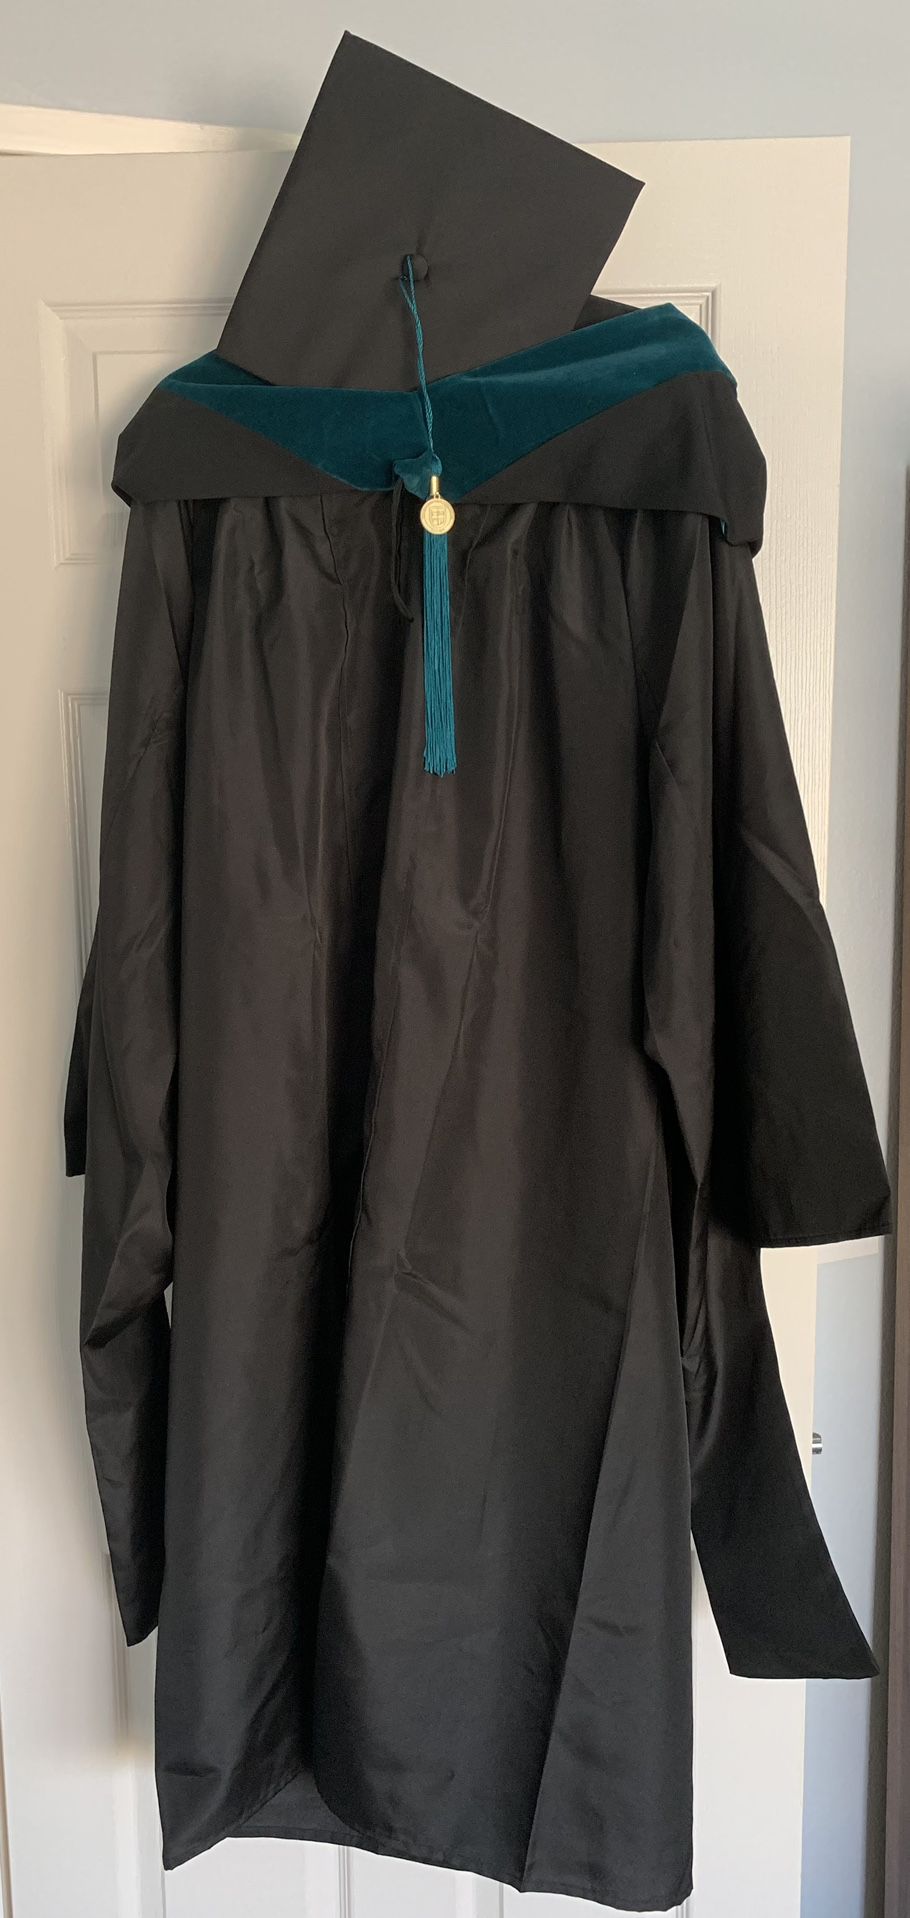 Graduation Gown and Cap with Teal White Black Master's Hood and Tassel Like New